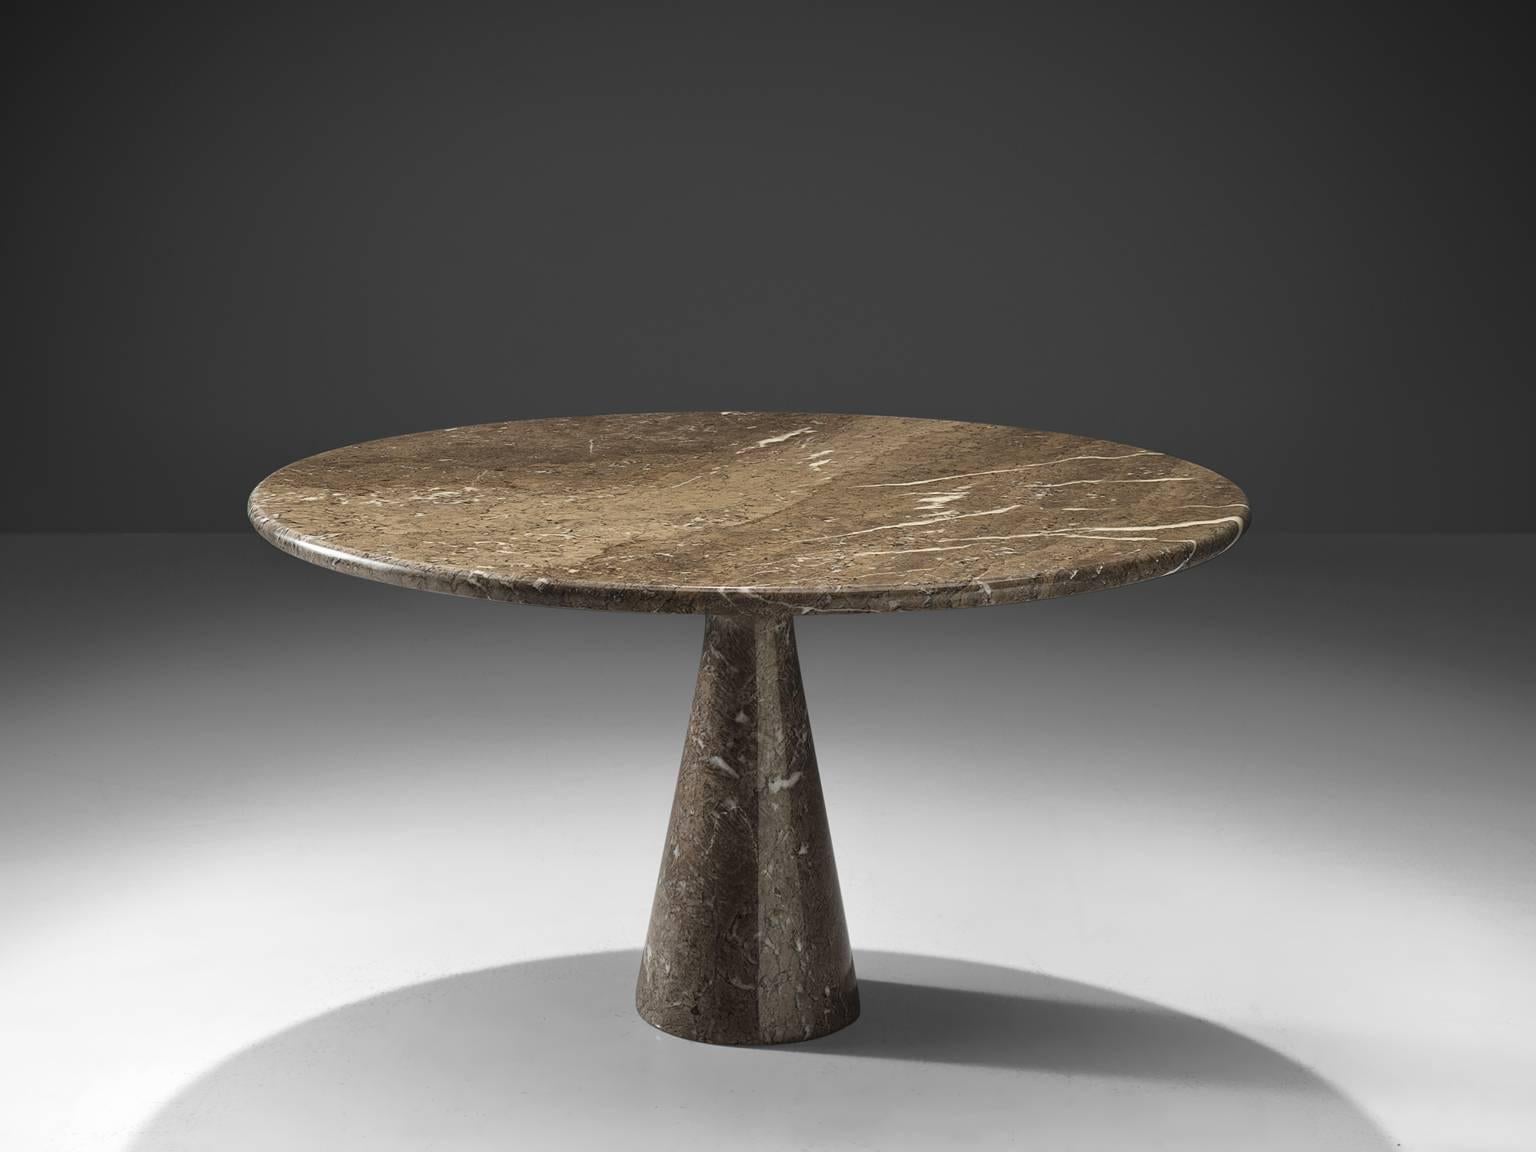 Angelo Mangiarotti for Skipper, table M1, marble, Italy, 1969

This patterned brown to greyish table is designed by Mangiarotti and a cone shaped base and a circular top. The circular top rests perfectly on the cone. The design showcases a play of